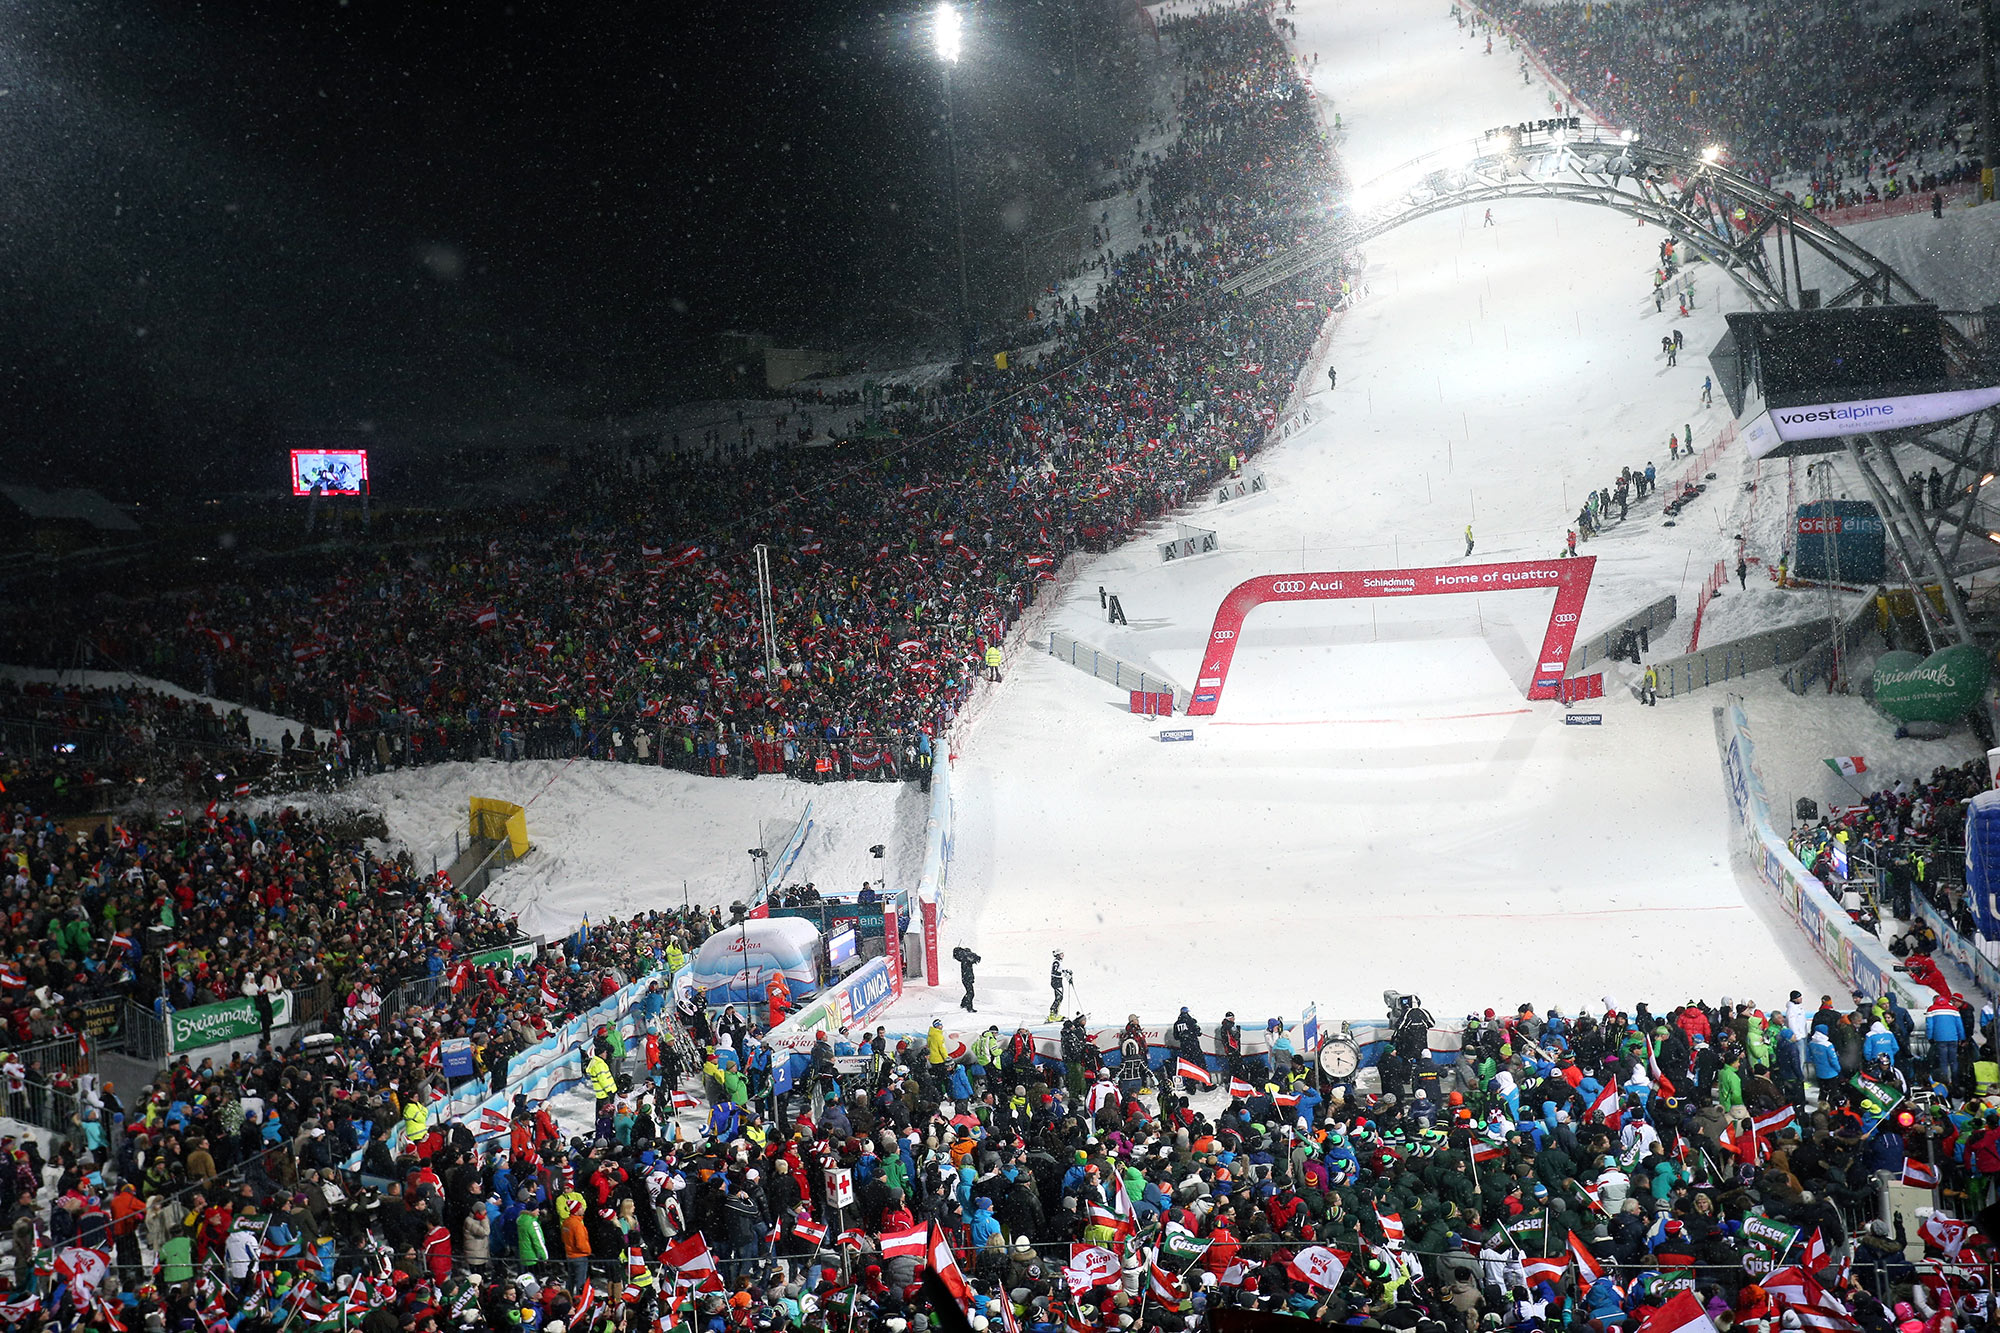 Fans and partygoers line the hill in Schladming